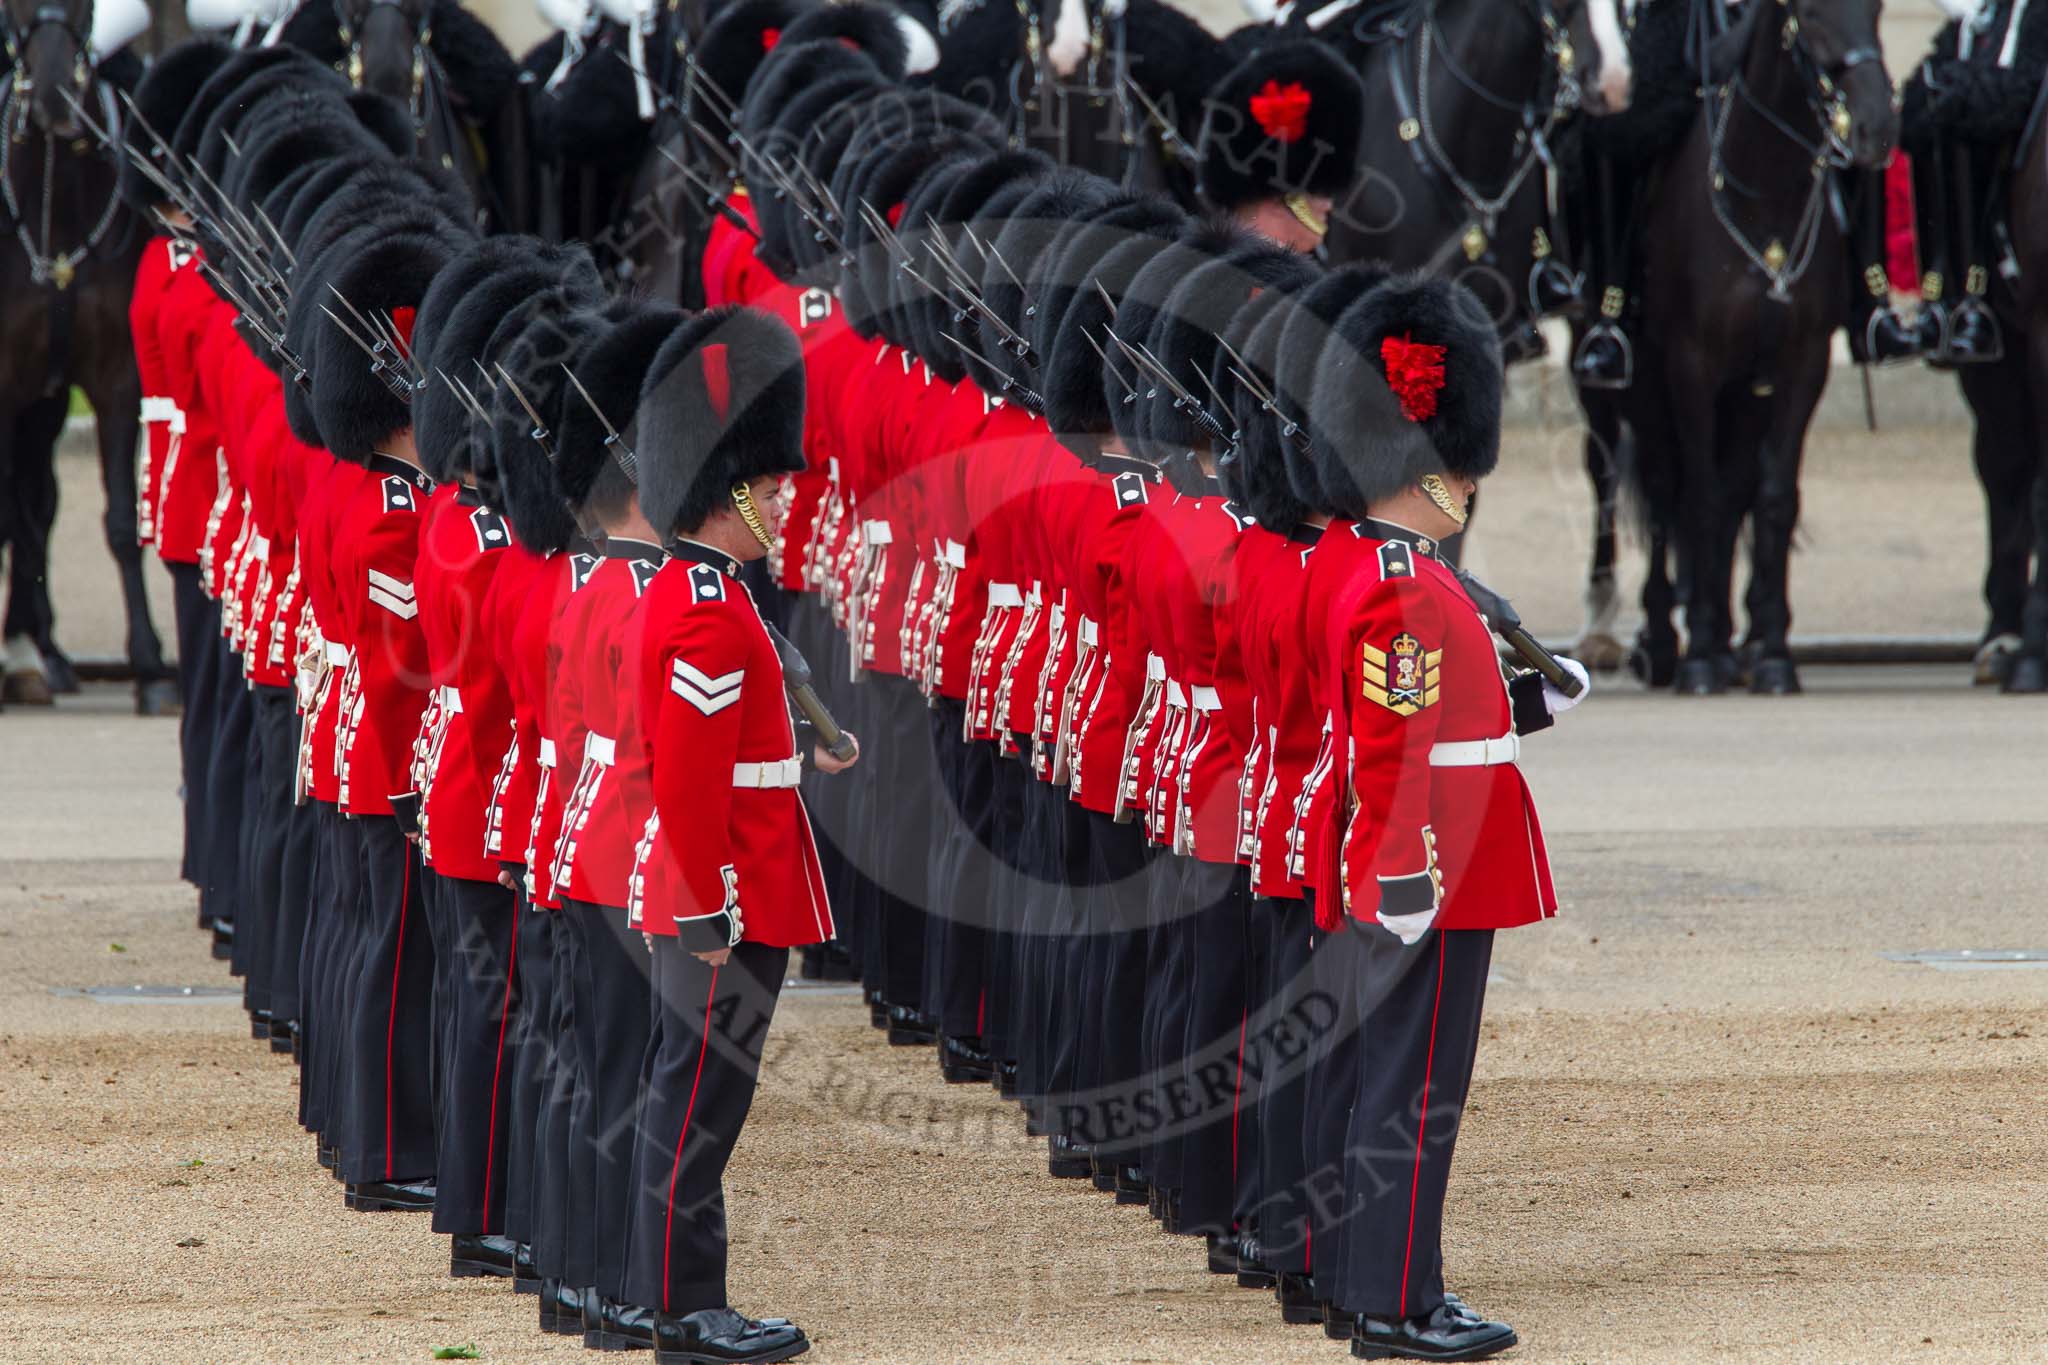 The Colonel's Review 2012: Preparing for the March Past by the Foot Guards..
Horse Guards Parade, Westminster,
London SW1,

United Kingdom,
on 09 June 2012 at 11:28, image #299